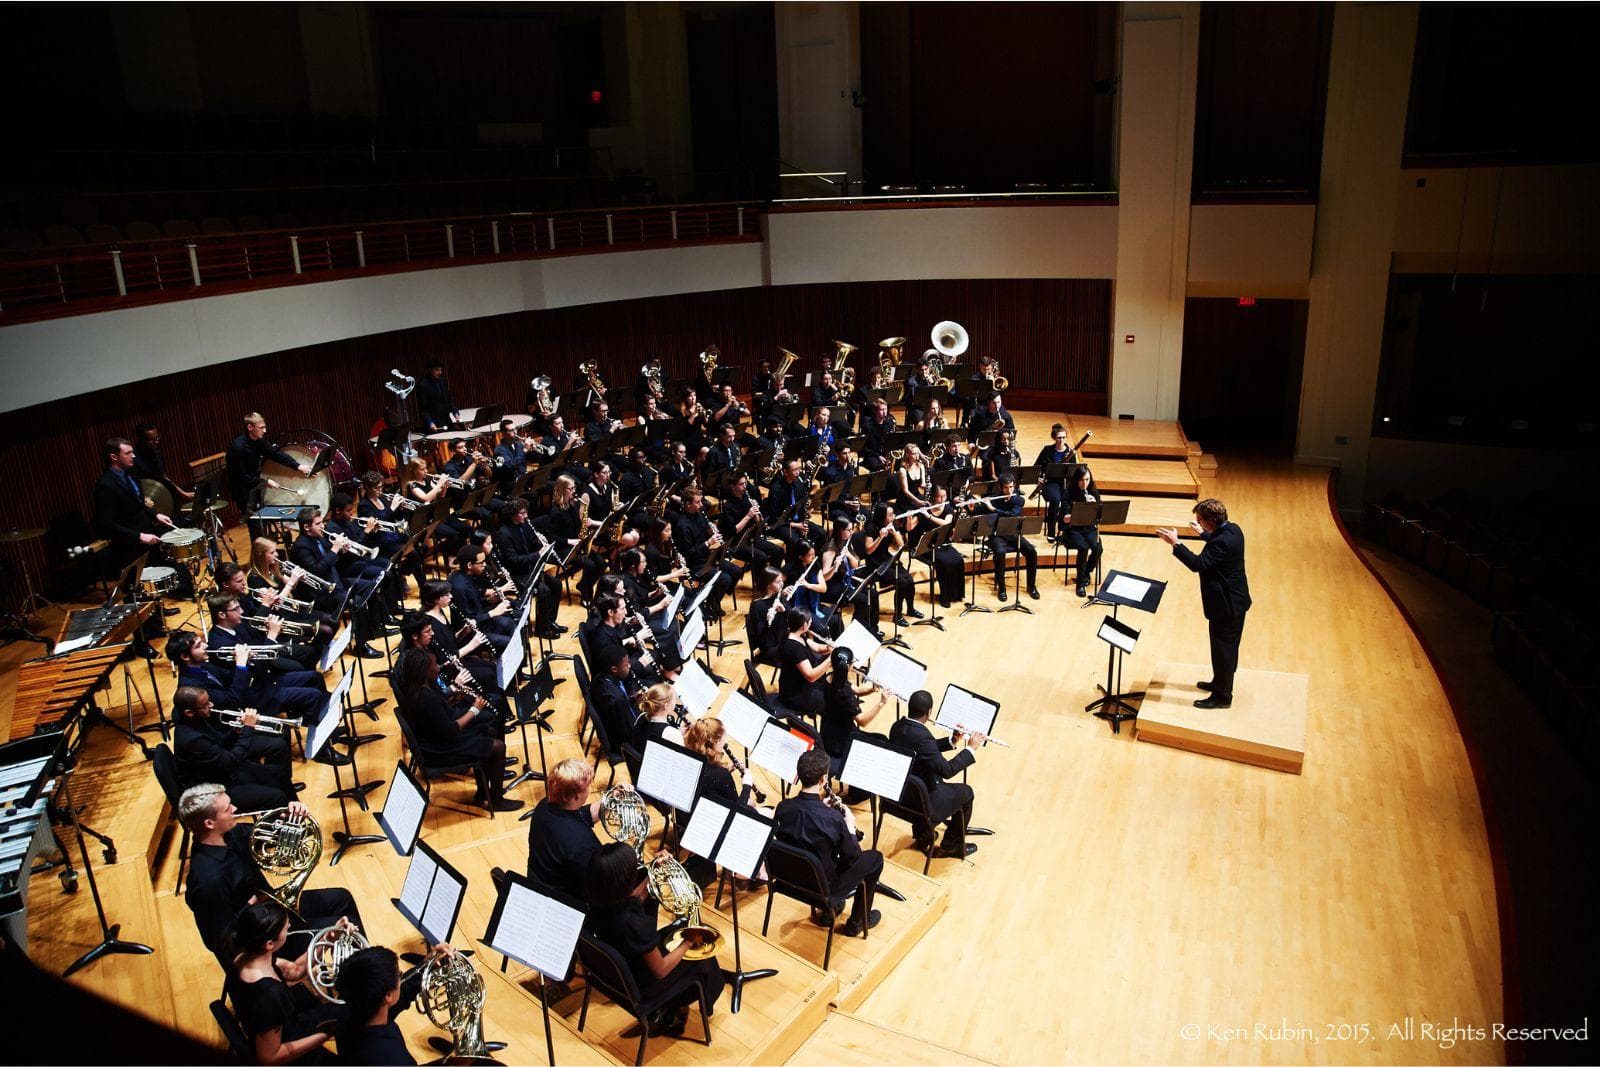 Band members perform on stage with an array of brass and wind instruments.